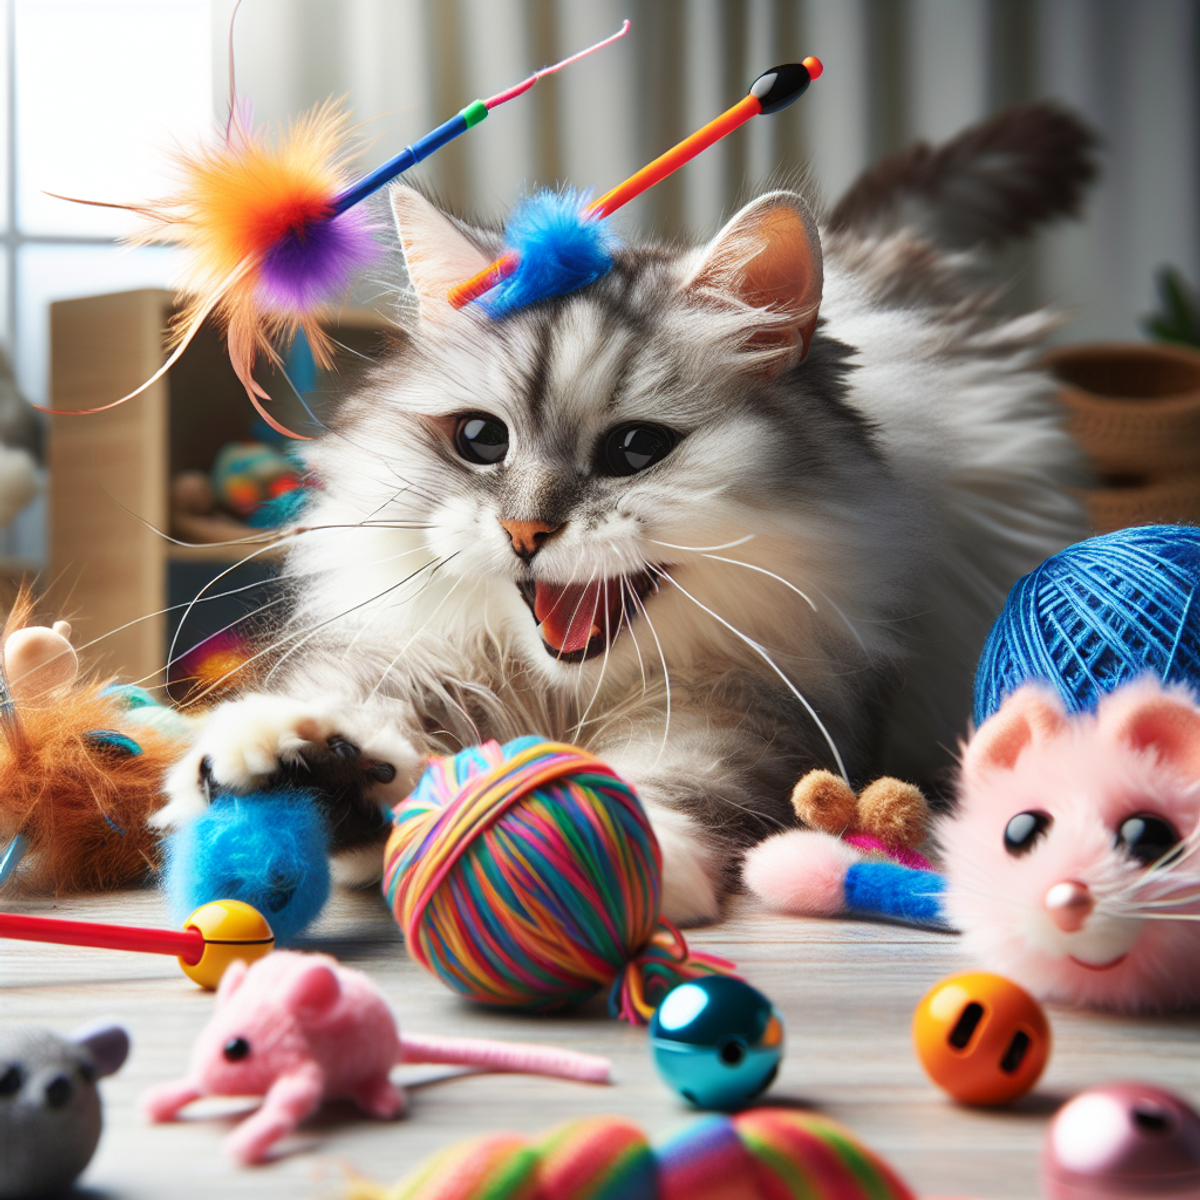 Senior cat playing with colorful toys.